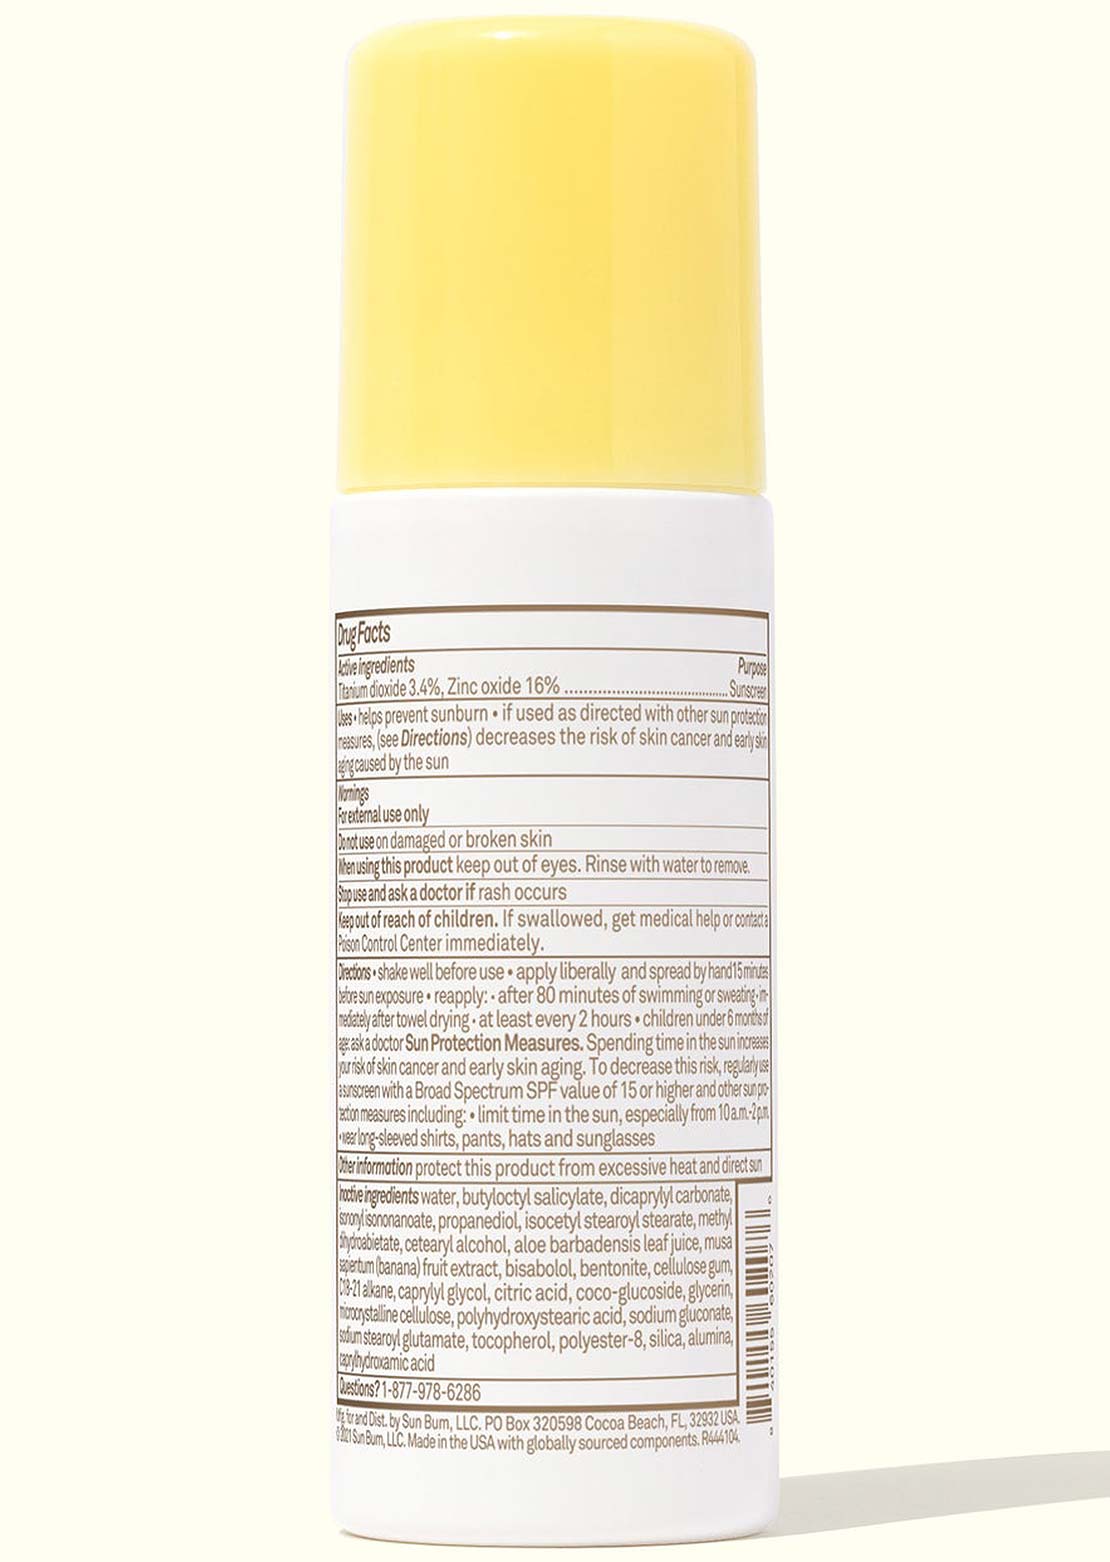 Sun Bum Baby SPF 50 Mineral Sunscreen Roll On - Fragrance Free